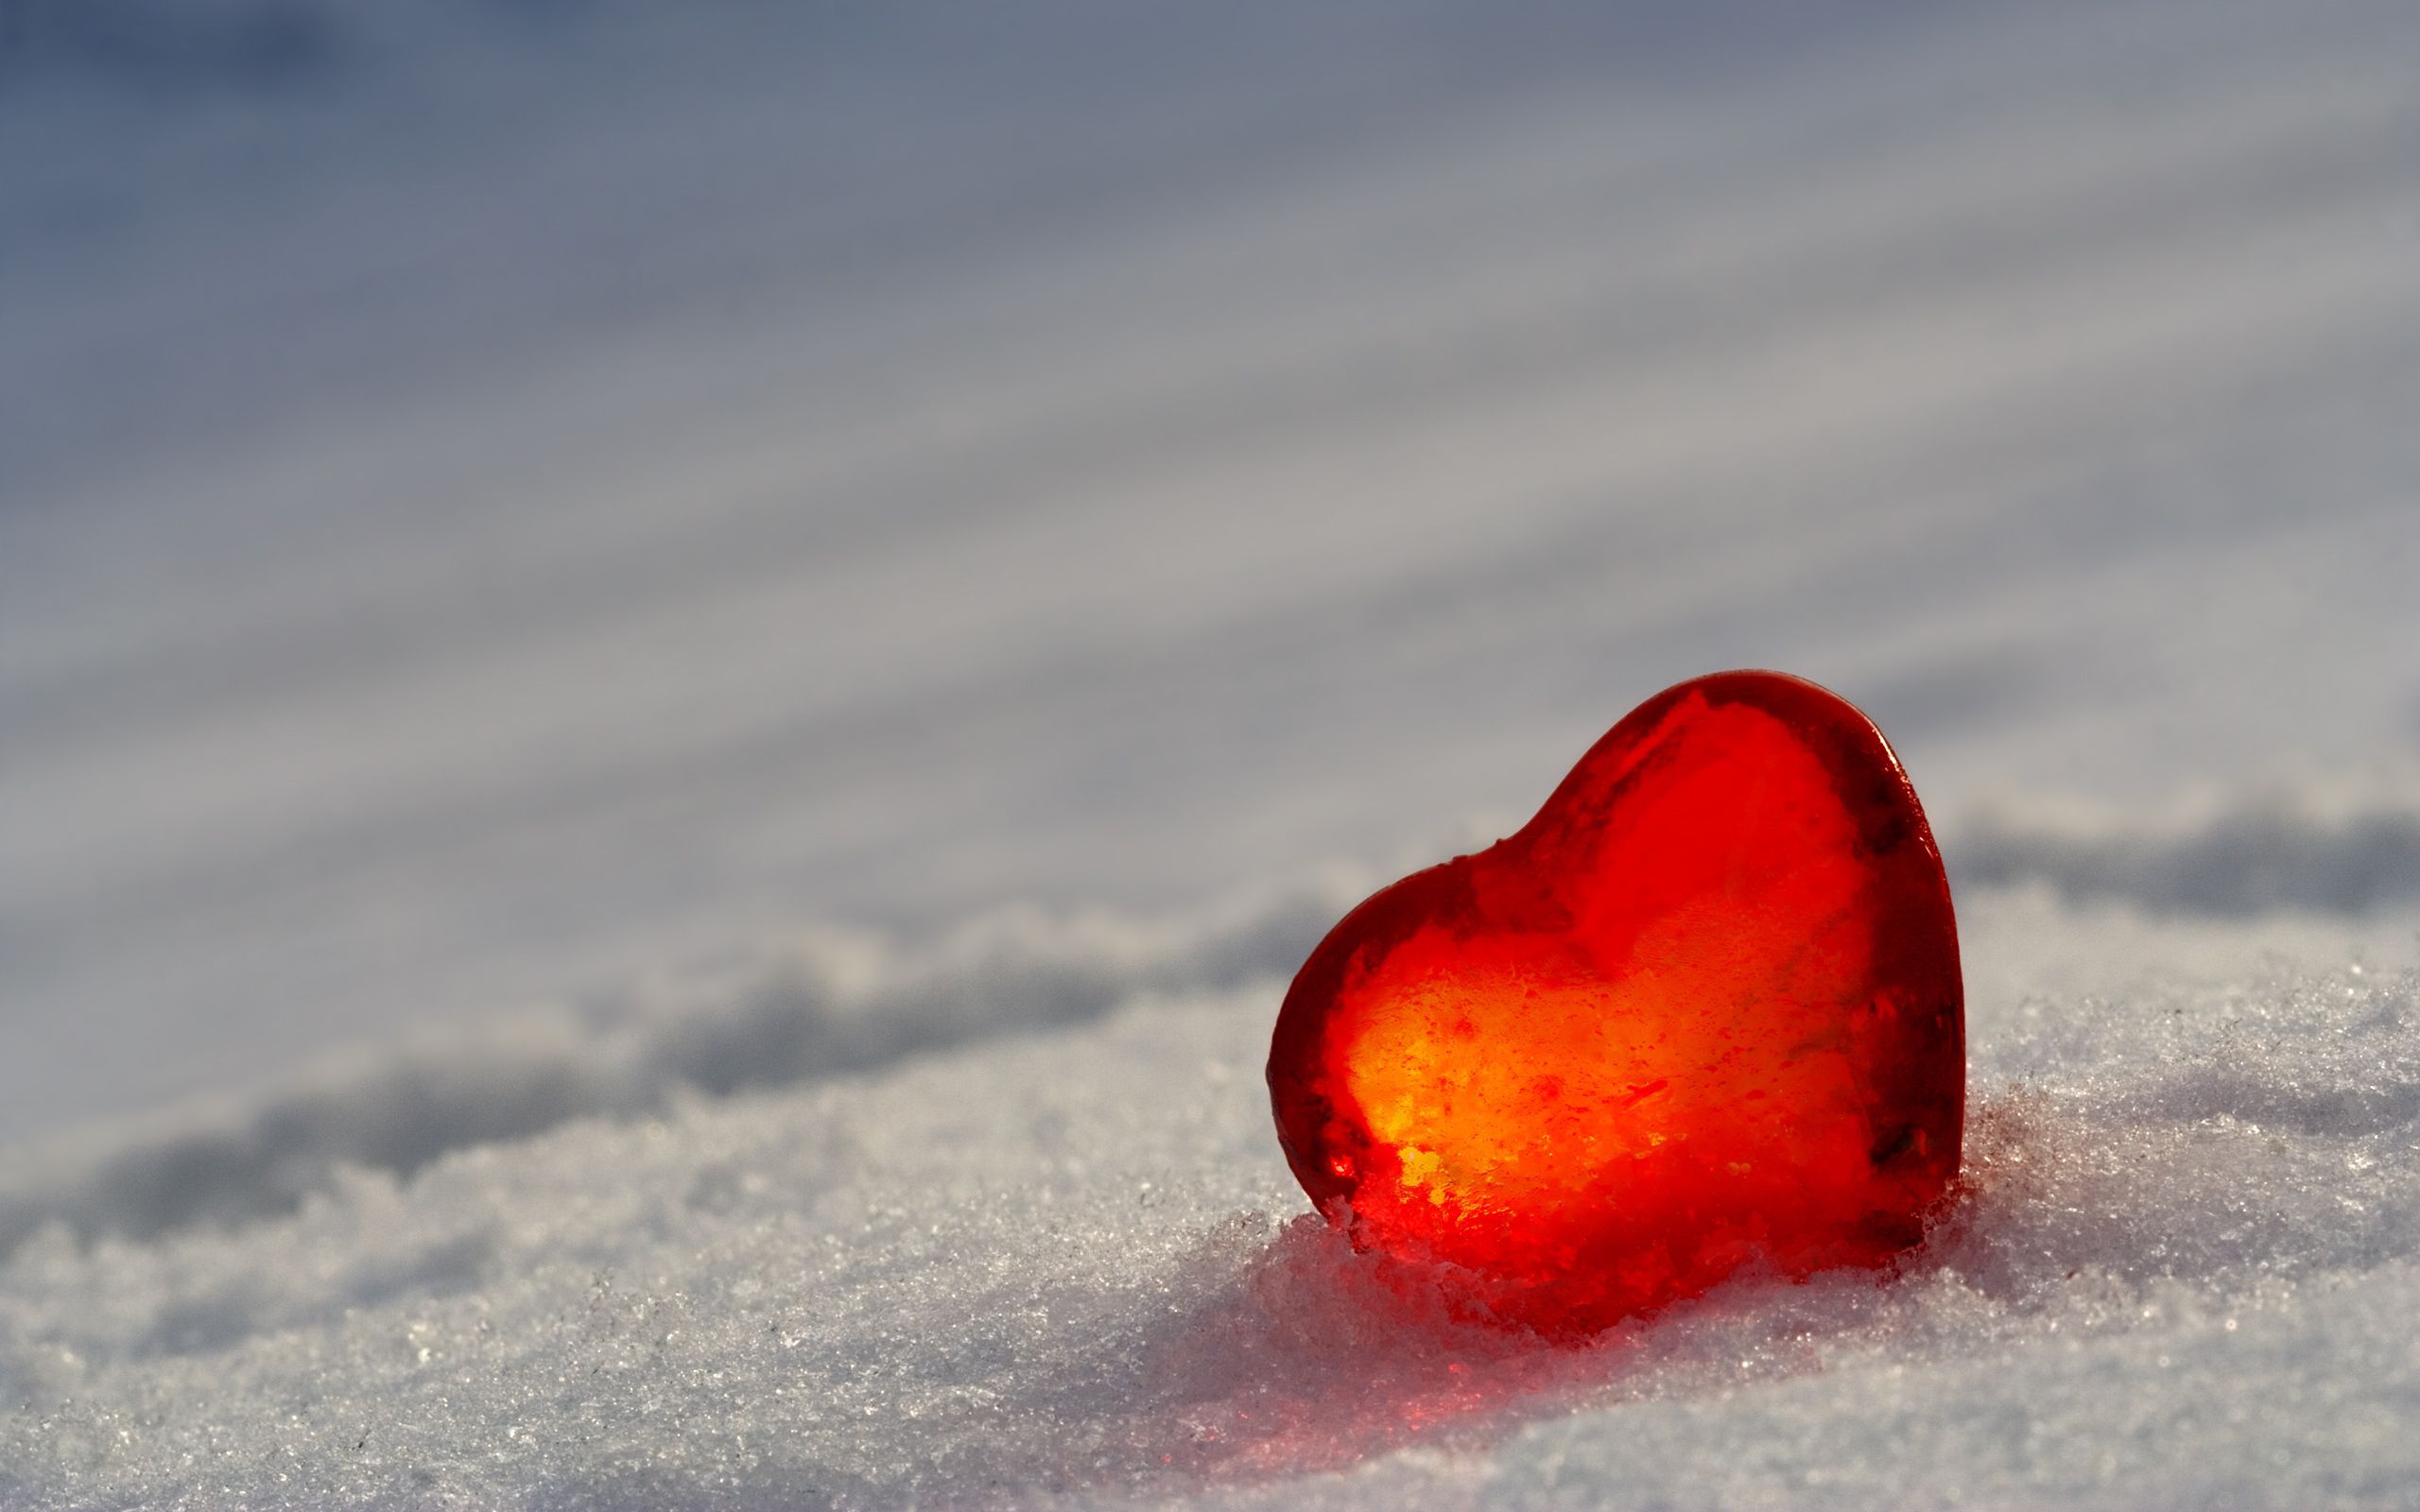 74580 download wallpaper heart, ice, snow, white, red, macro, glass screensavers and pictures for free